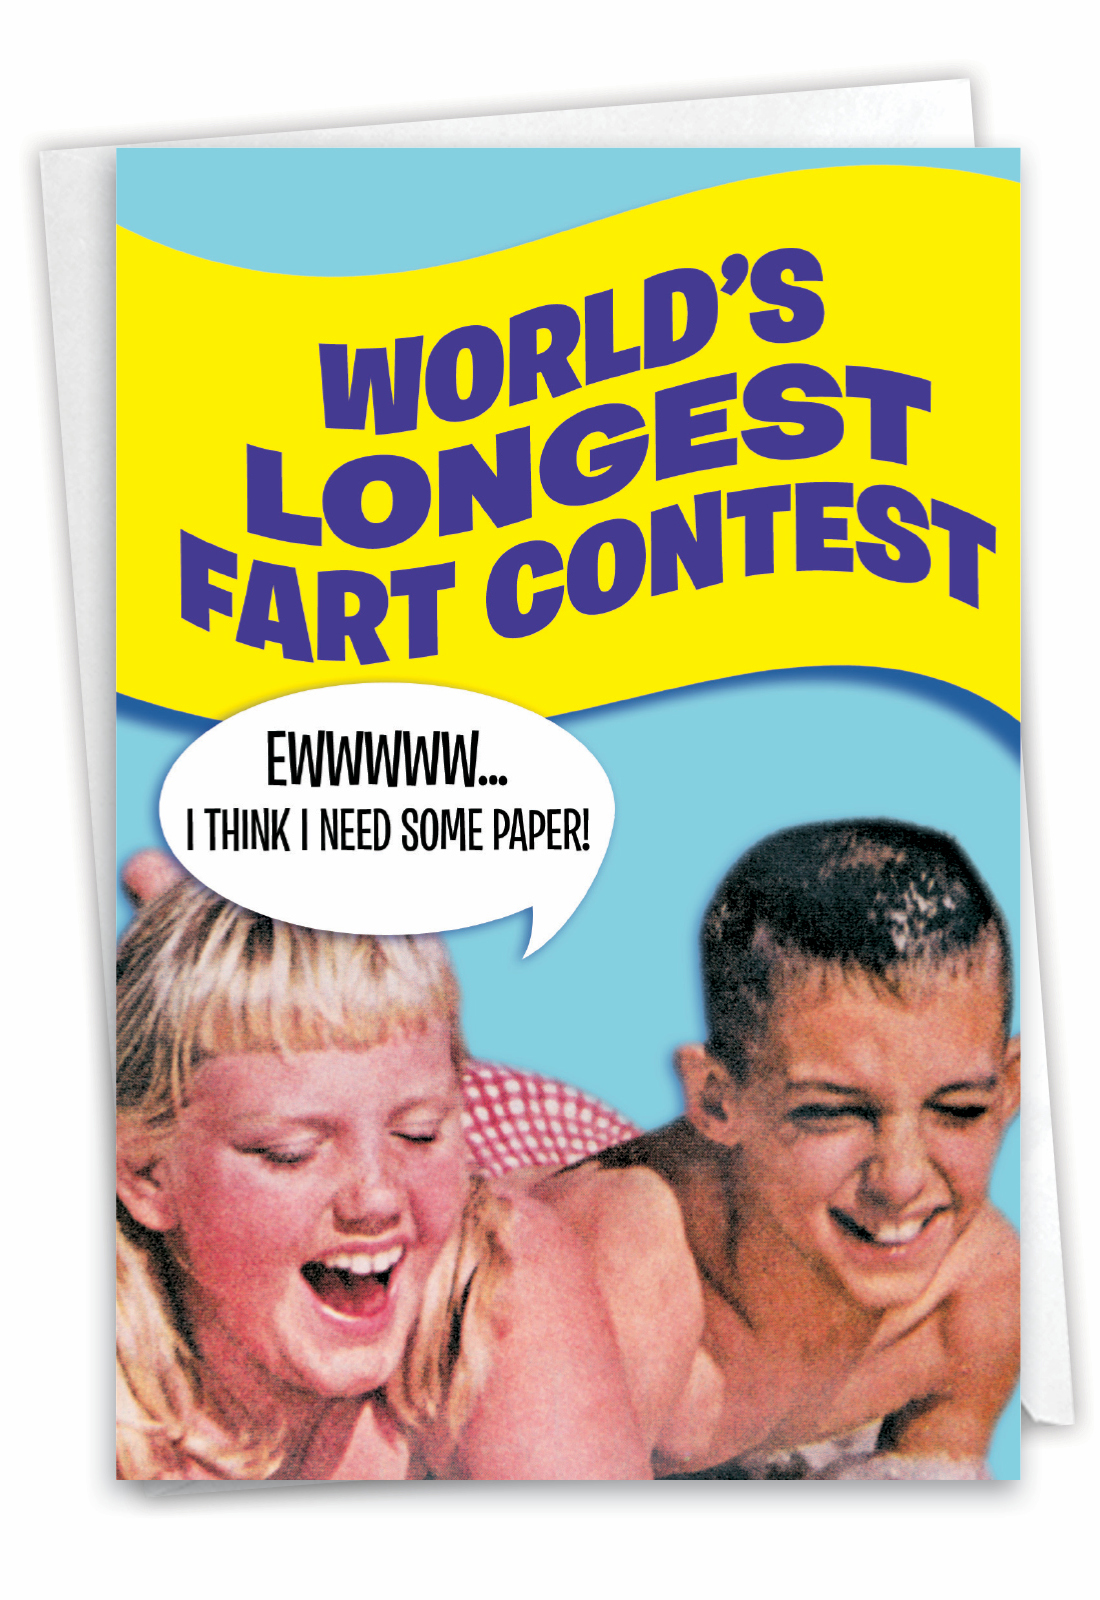 asma munawar recommends the worlds longest fart pic